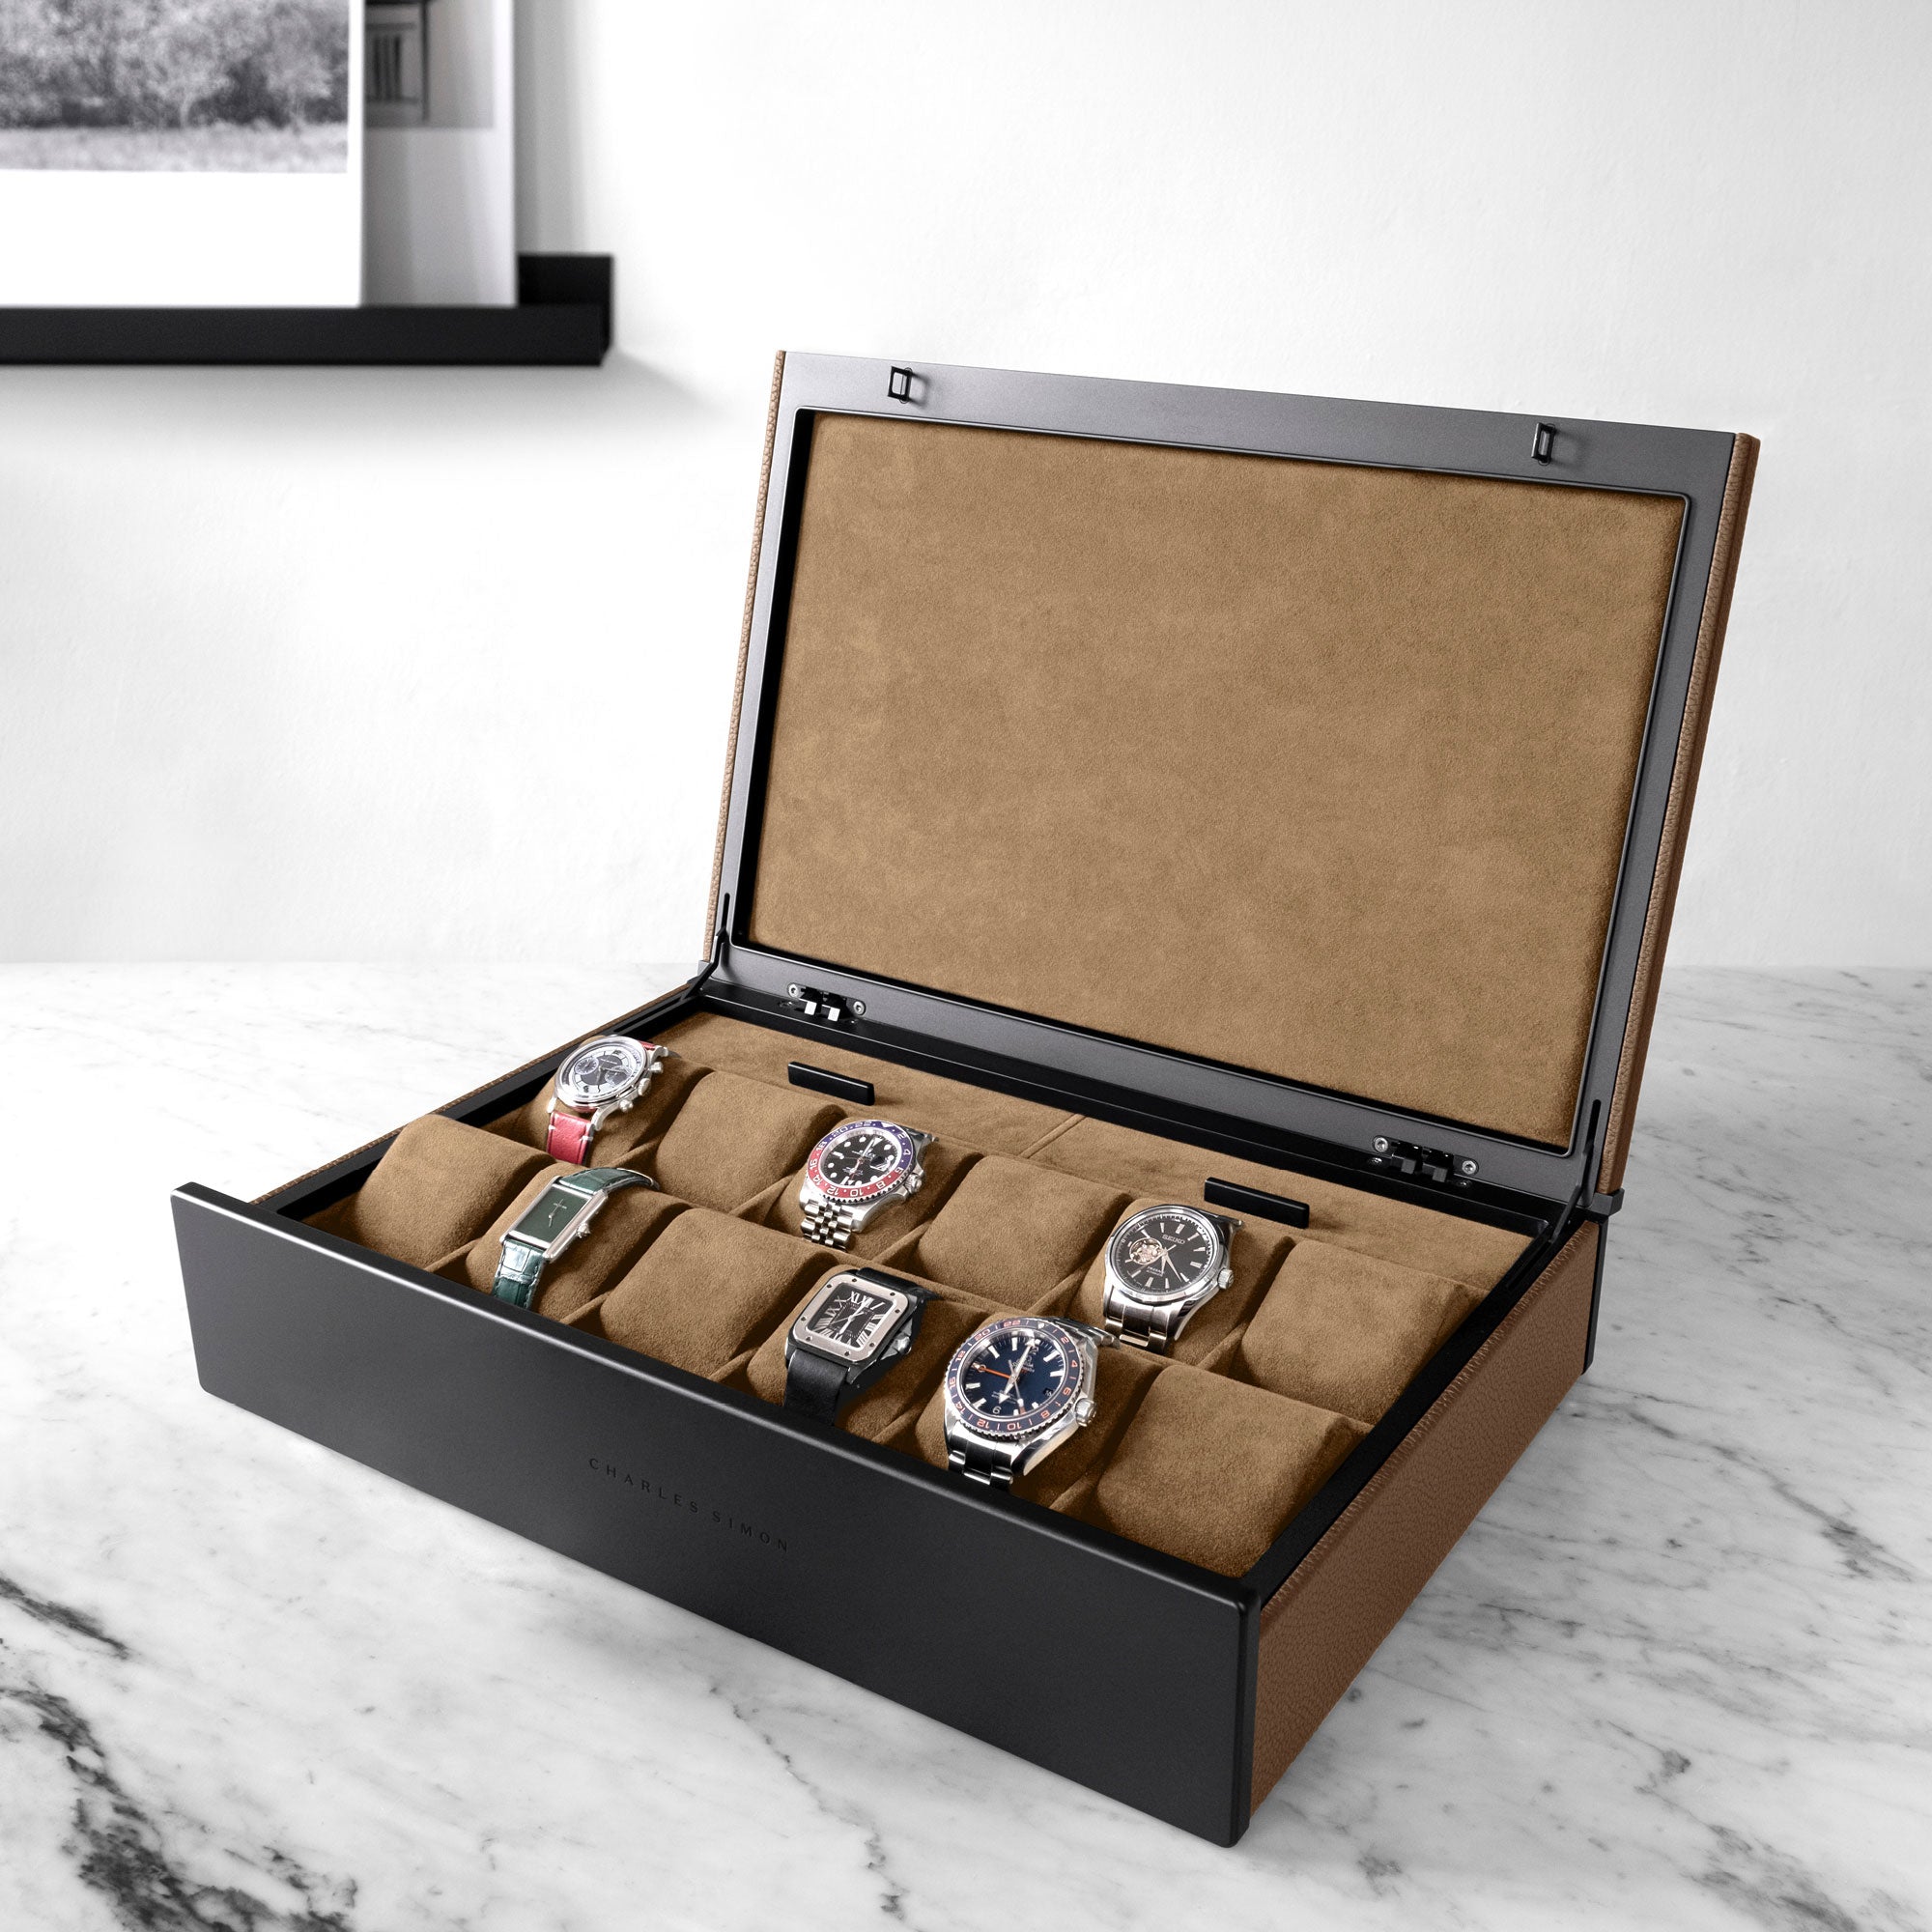 Lifestyle photo of man opening tan leather Spence 12 Watch box with luxury watch collection displayed inside